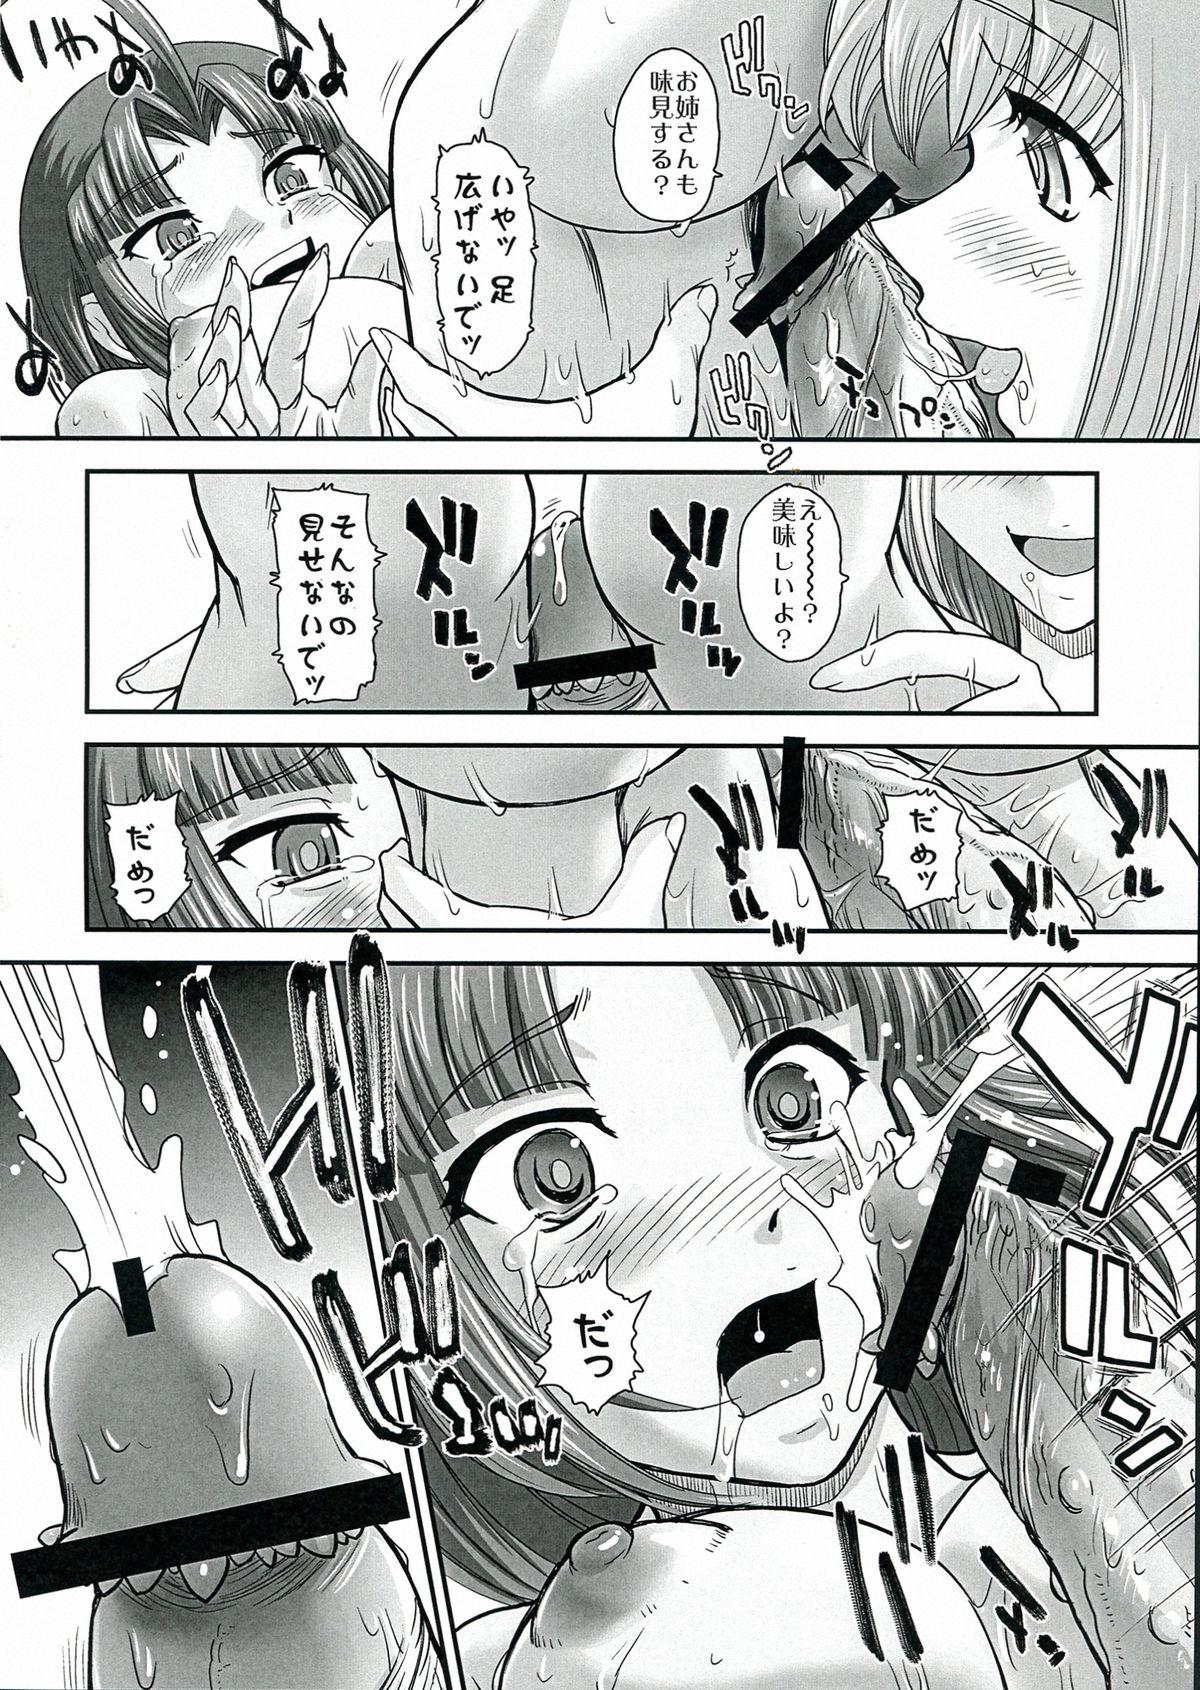 Pussy BehindMoon Recycle 3 - Space battleship yamato Juicy - Page 10